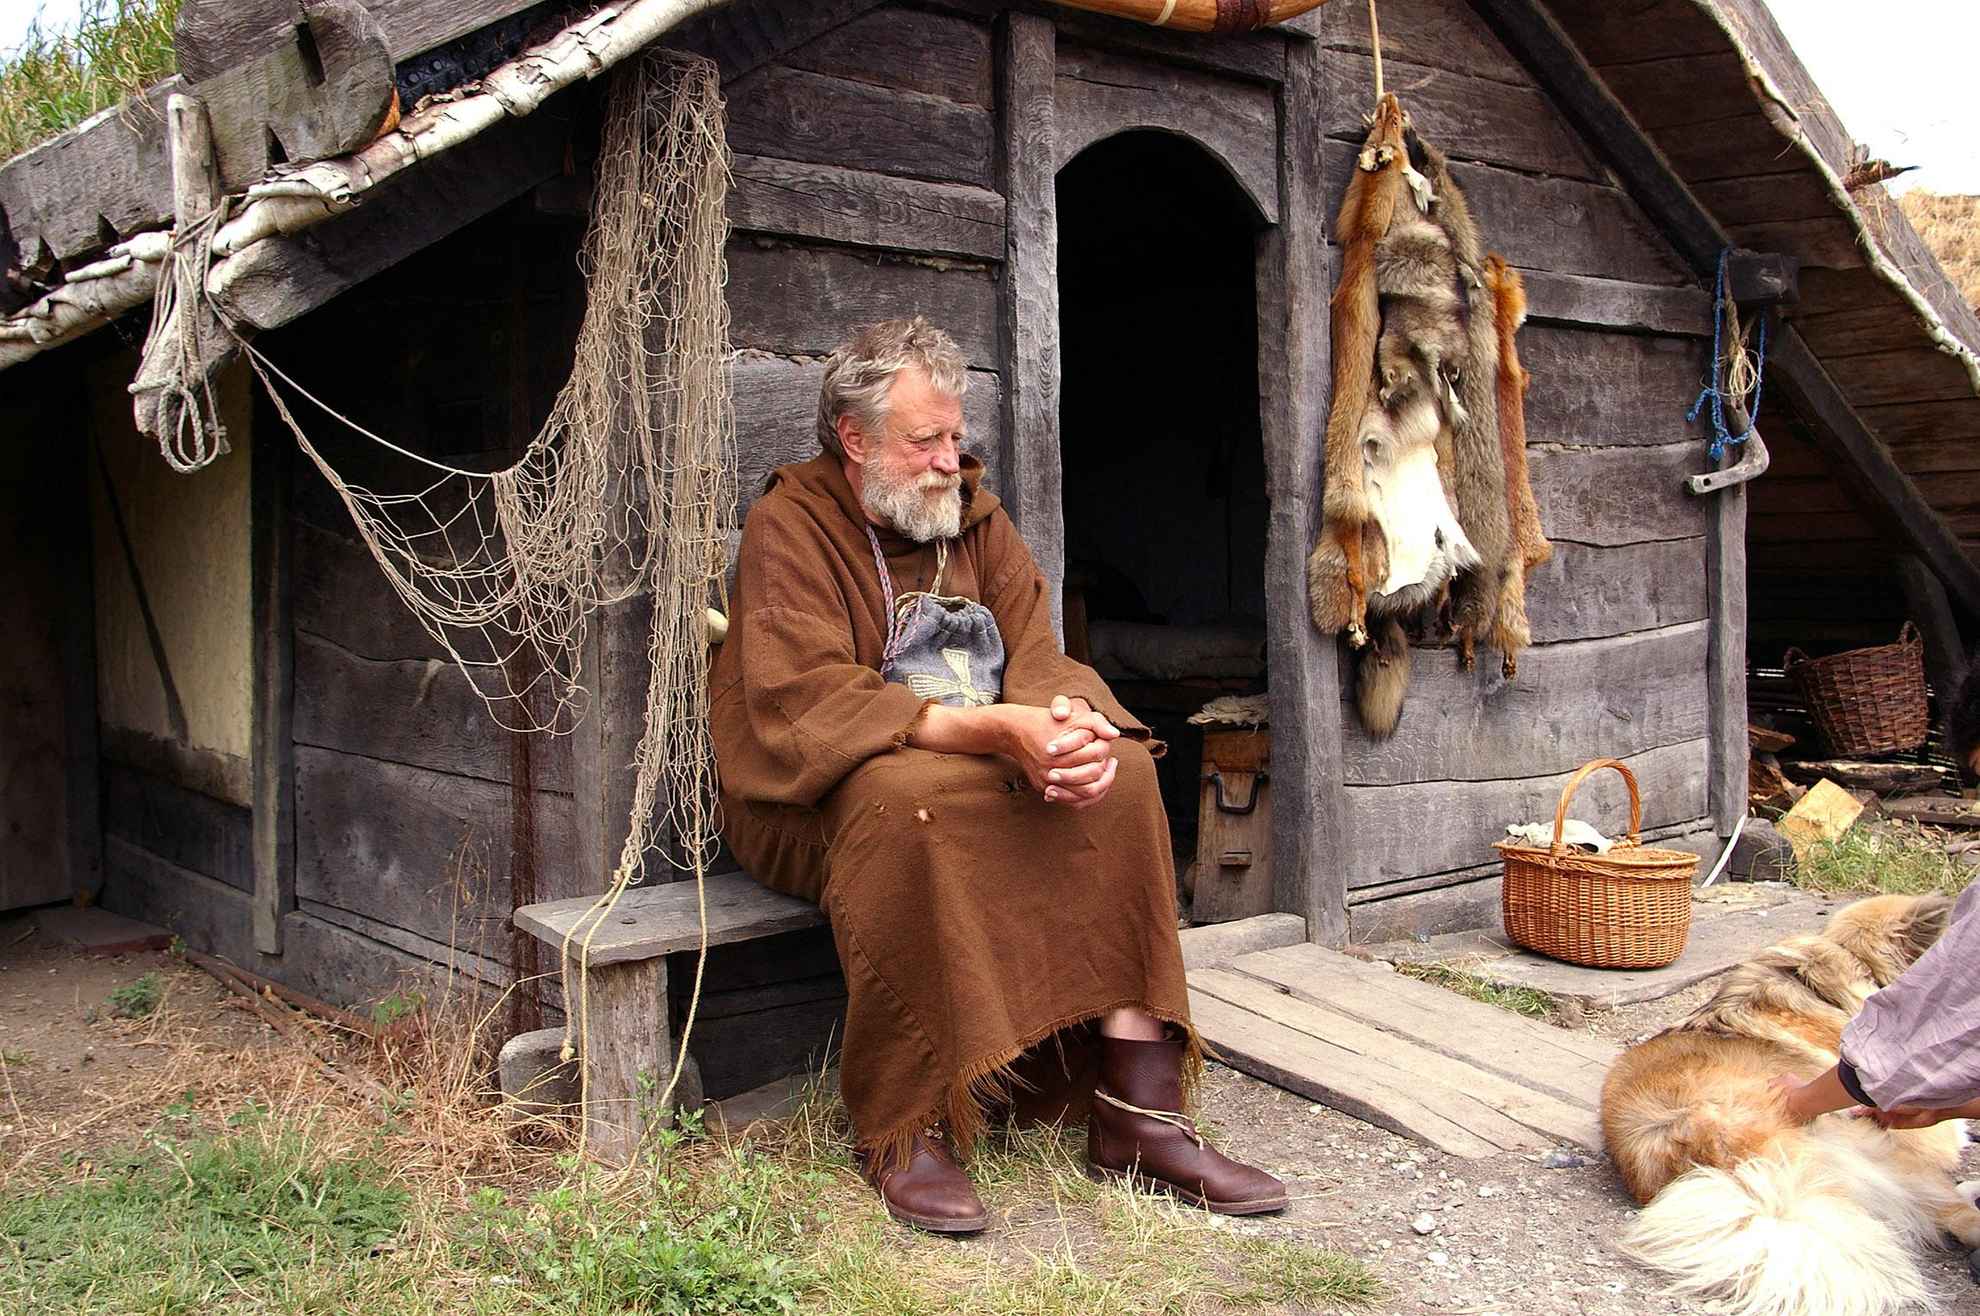 An old man dressed as a viking sits in front of an old wooden house.